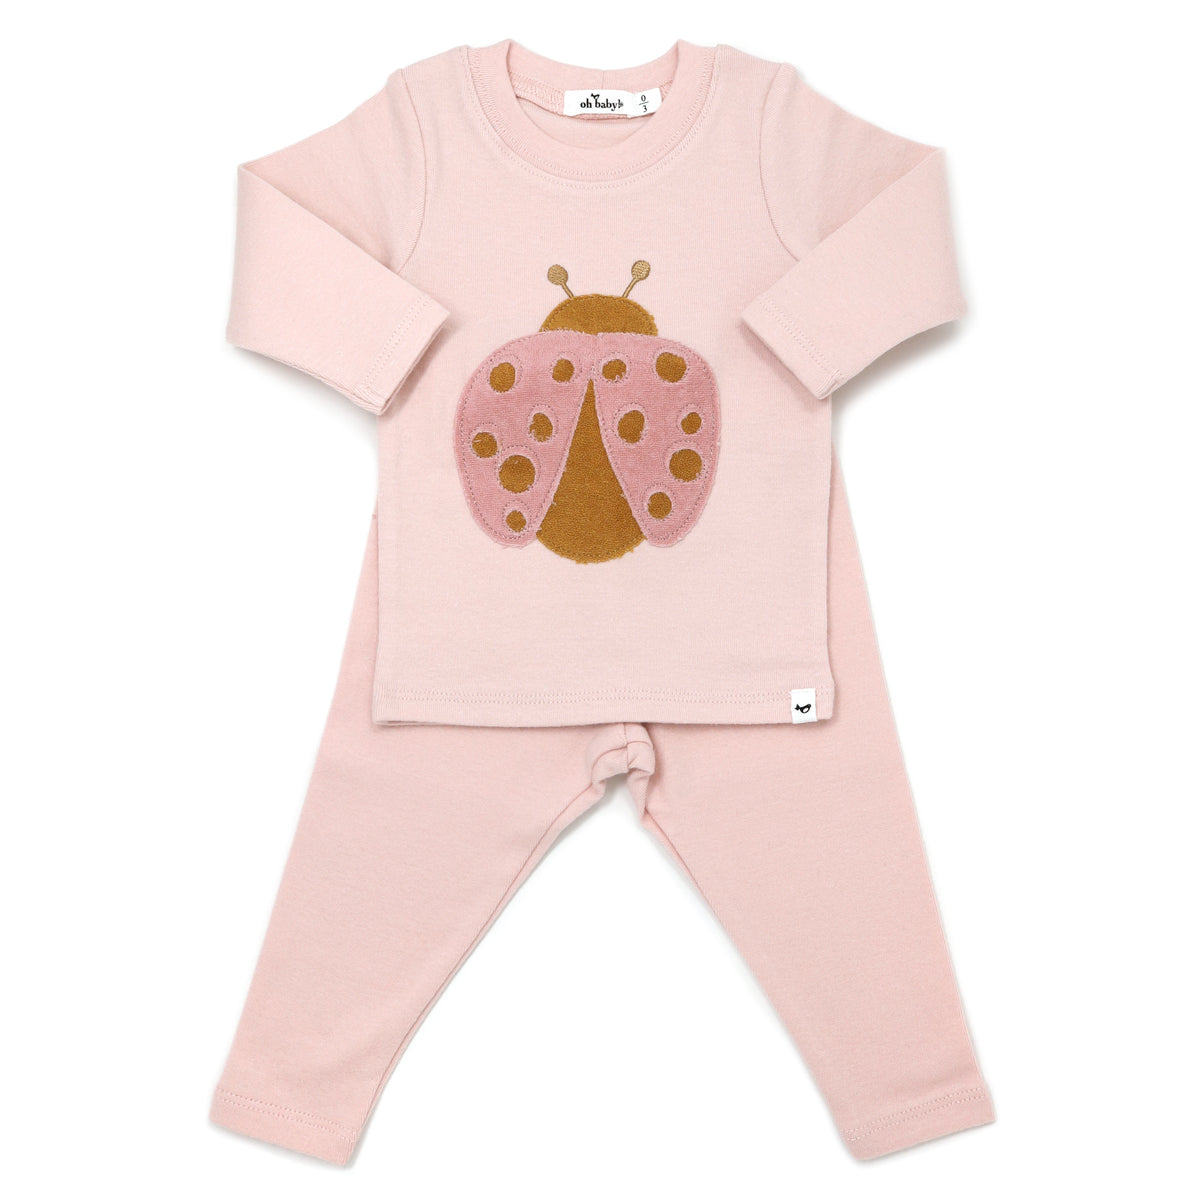 oh baby! Two Piece Set - Blush Ladybug Terry Applique - Pale Pink